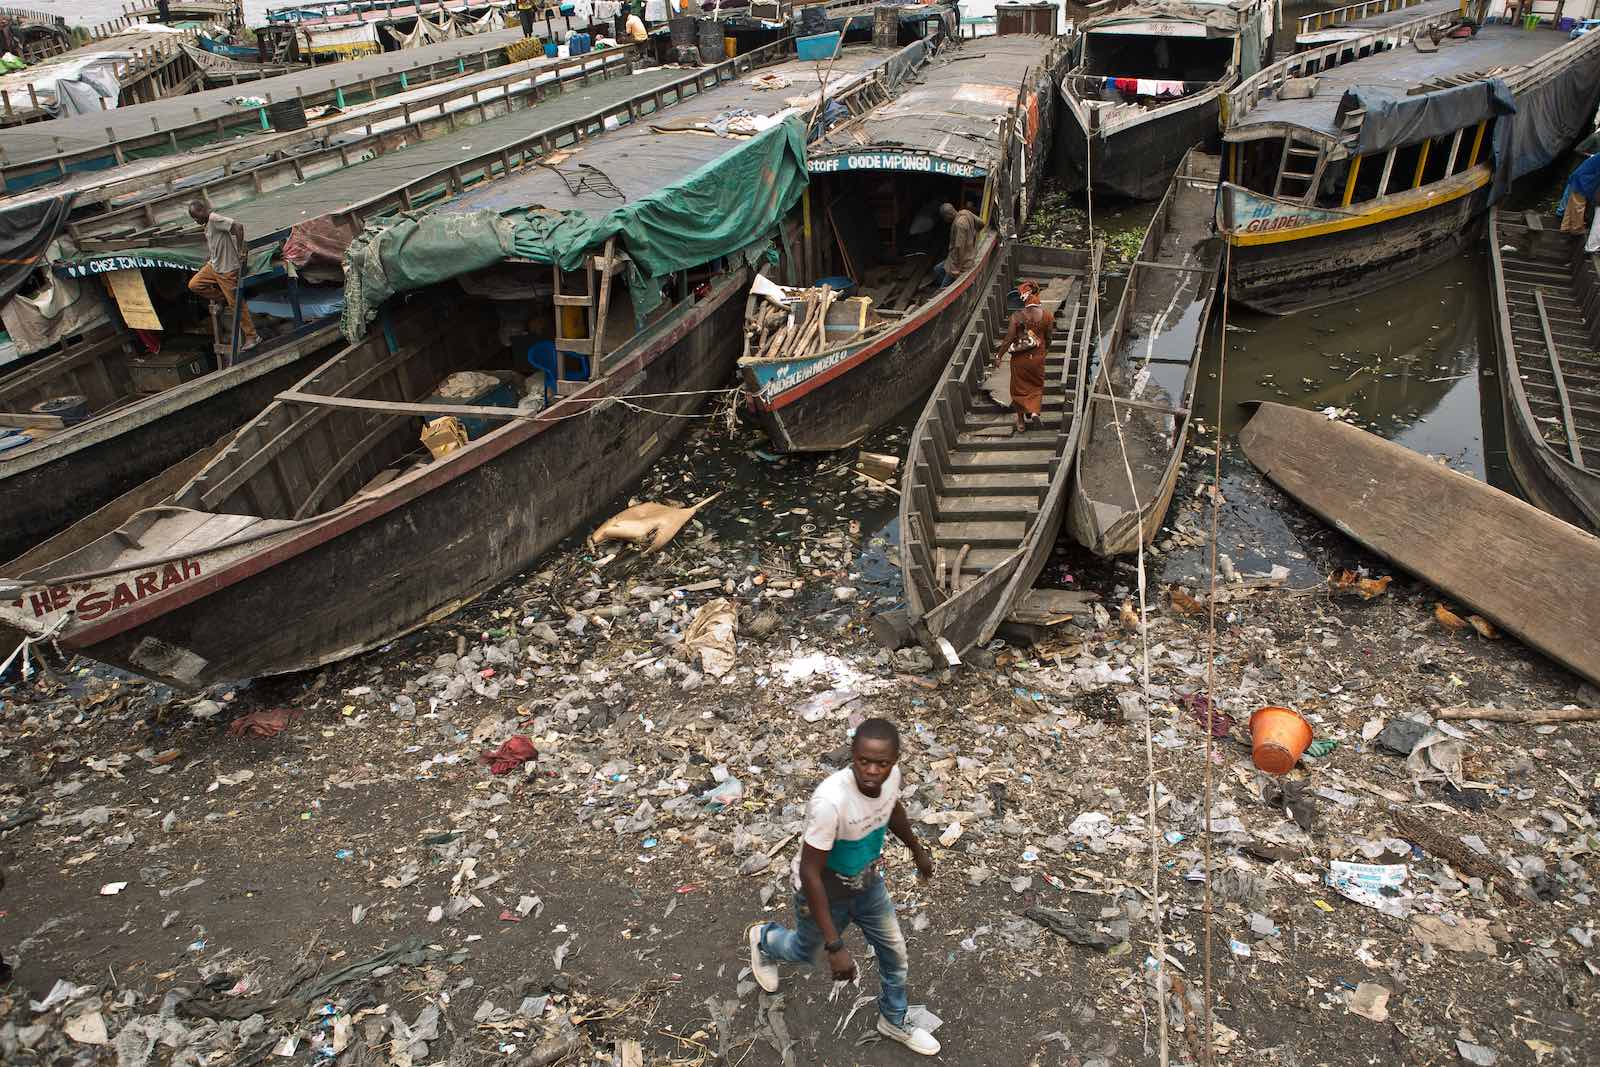 Tackling health impacts of plastic pollution in Africa